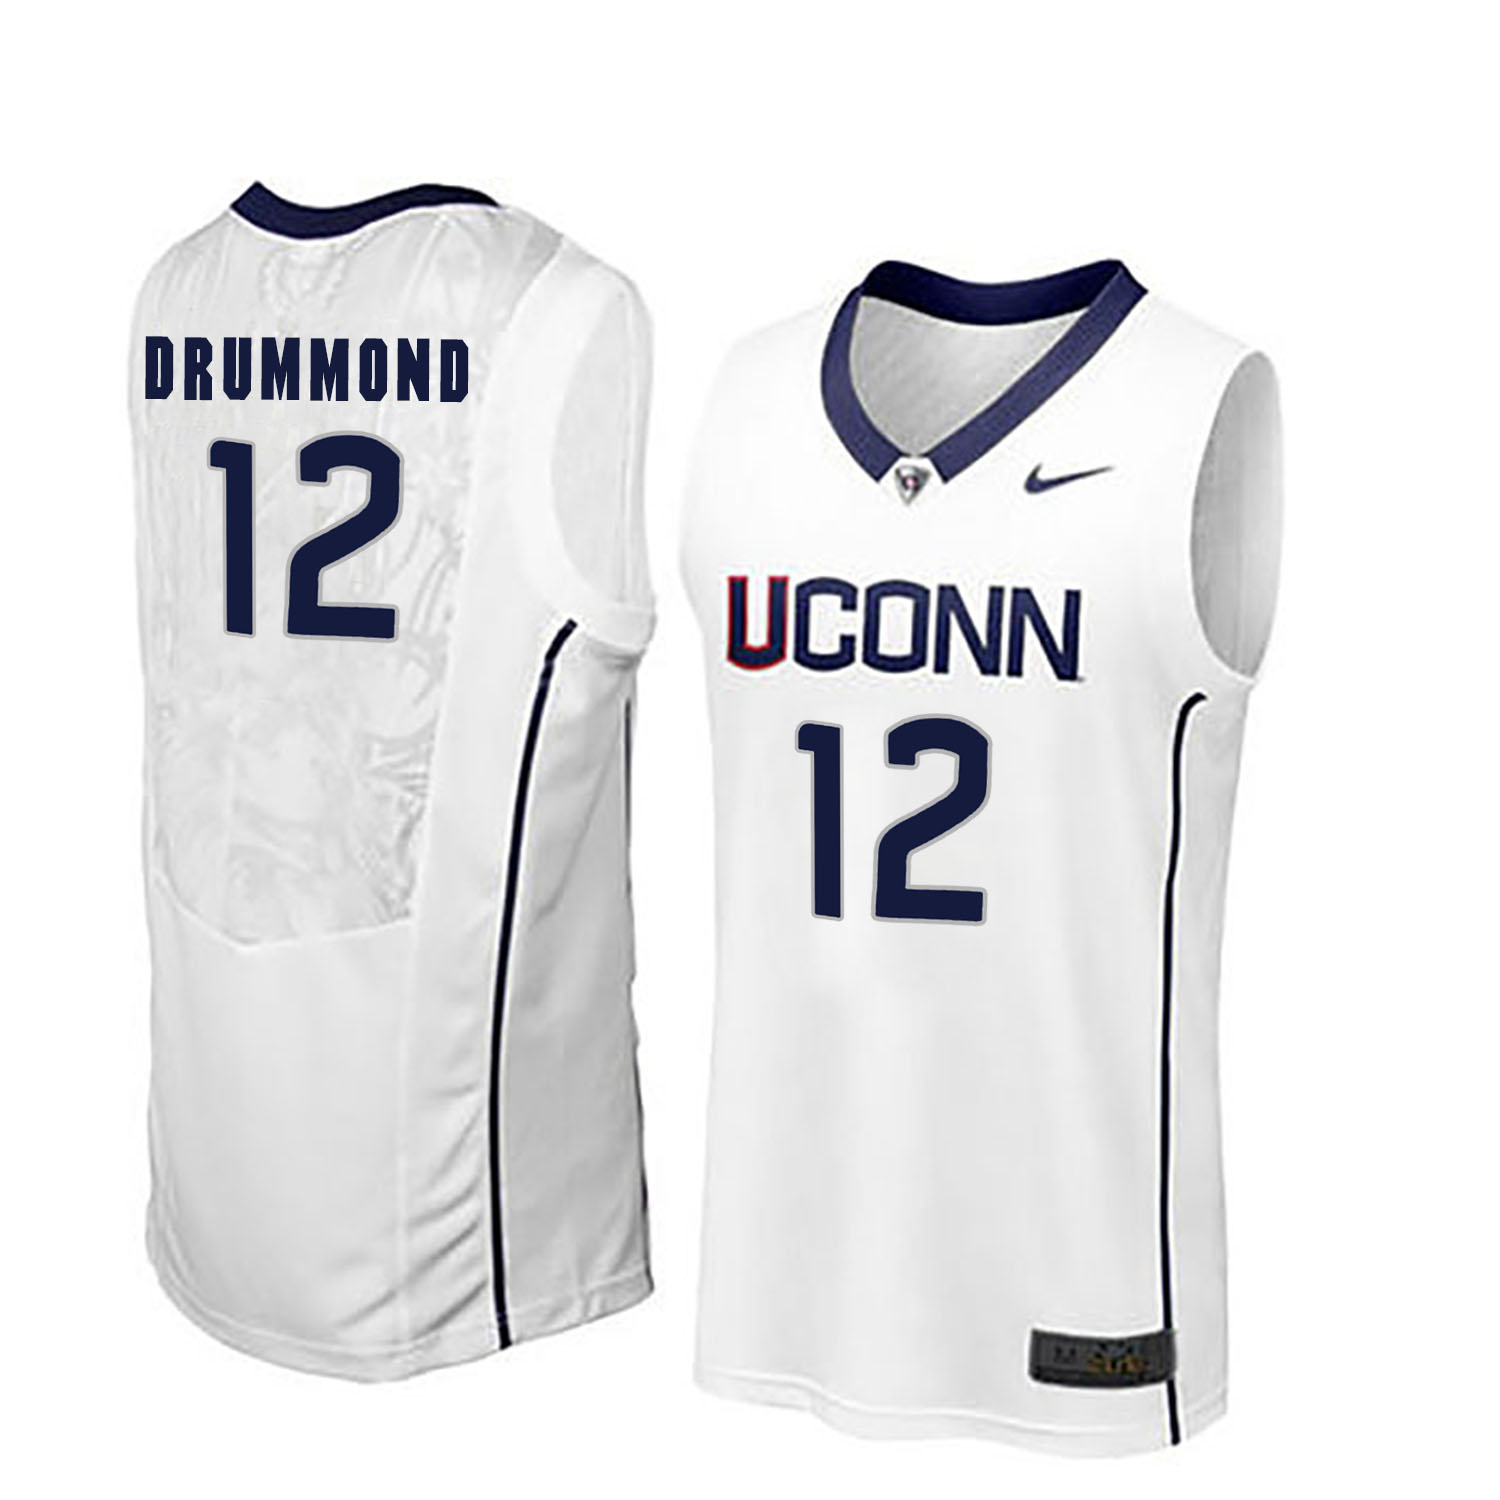 UConn Huskies 12 Andre Drummond White College Basketball Jersey